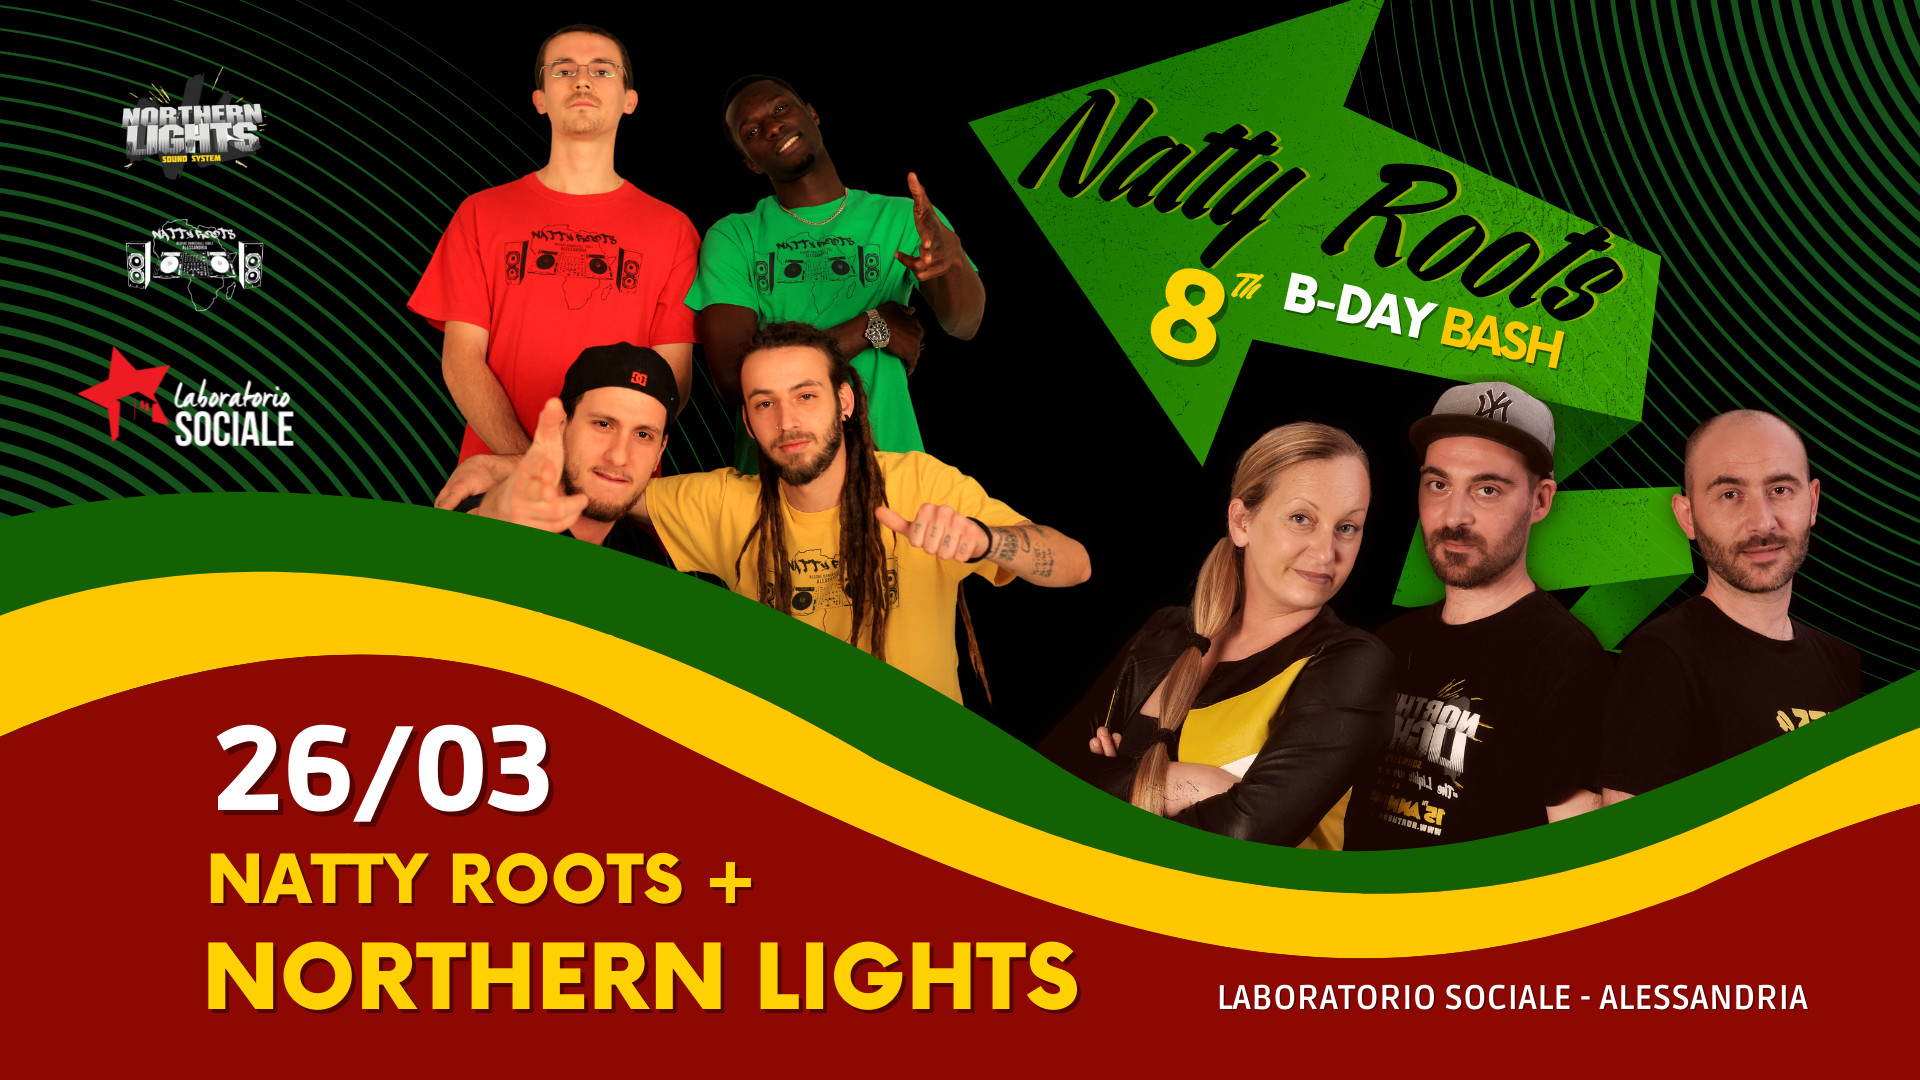 Natty Roots 8th b-day bash with Northern Lights